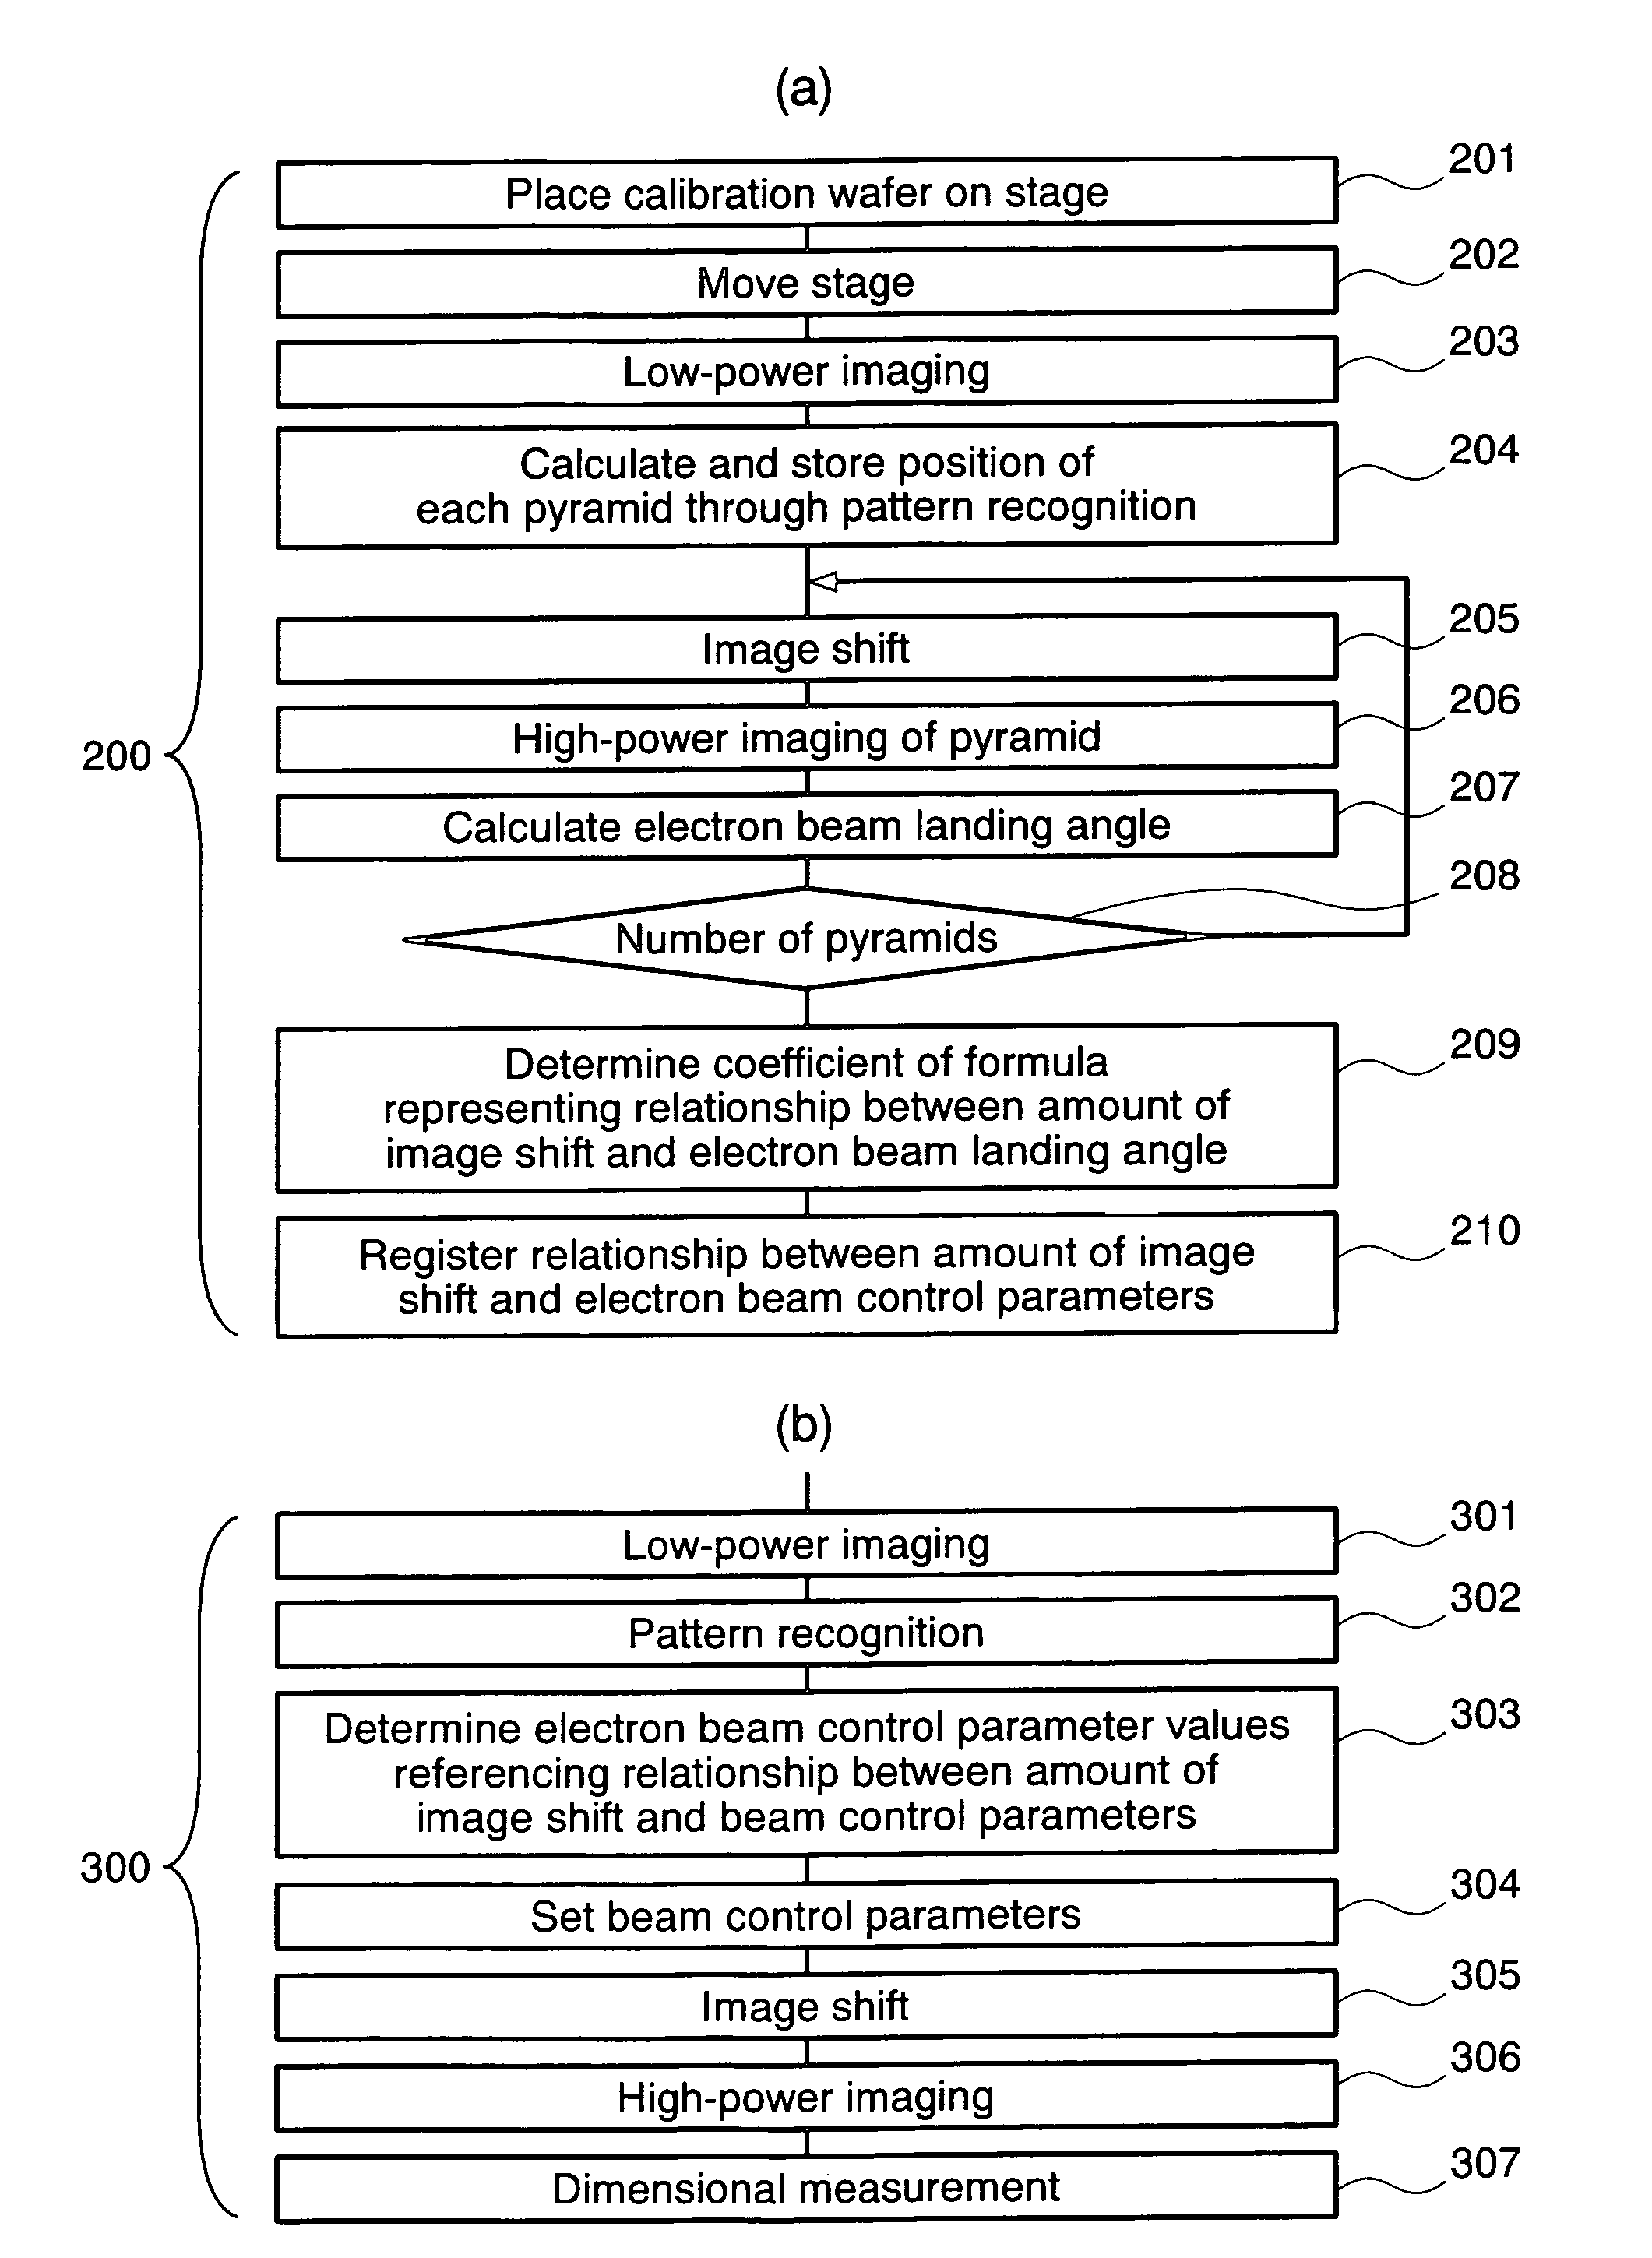 Charged particle beam apparatus and methods for capturing images using the same